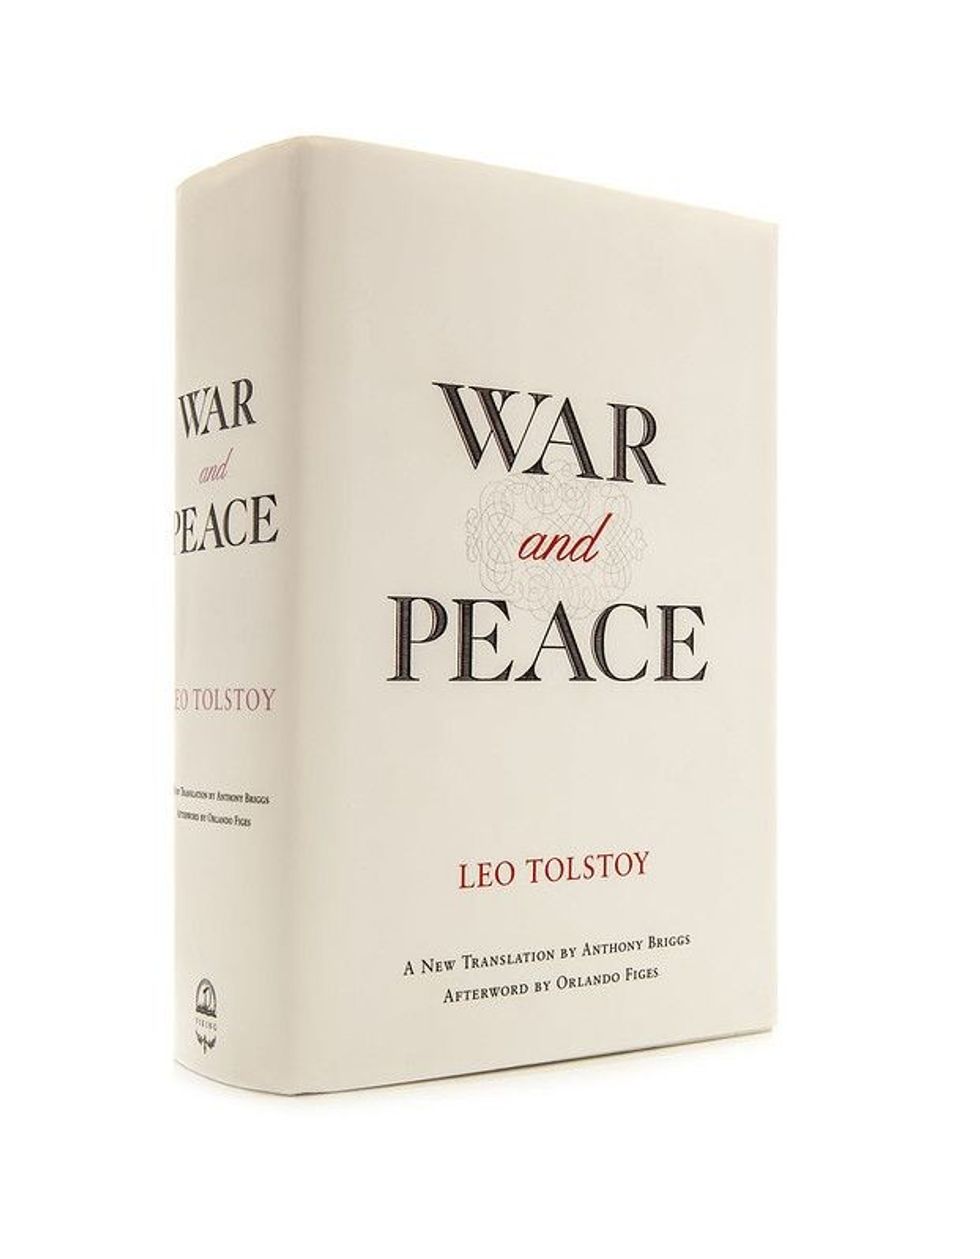 War & Peace by Leo Tolstoy - Translation by Anthony Briggs